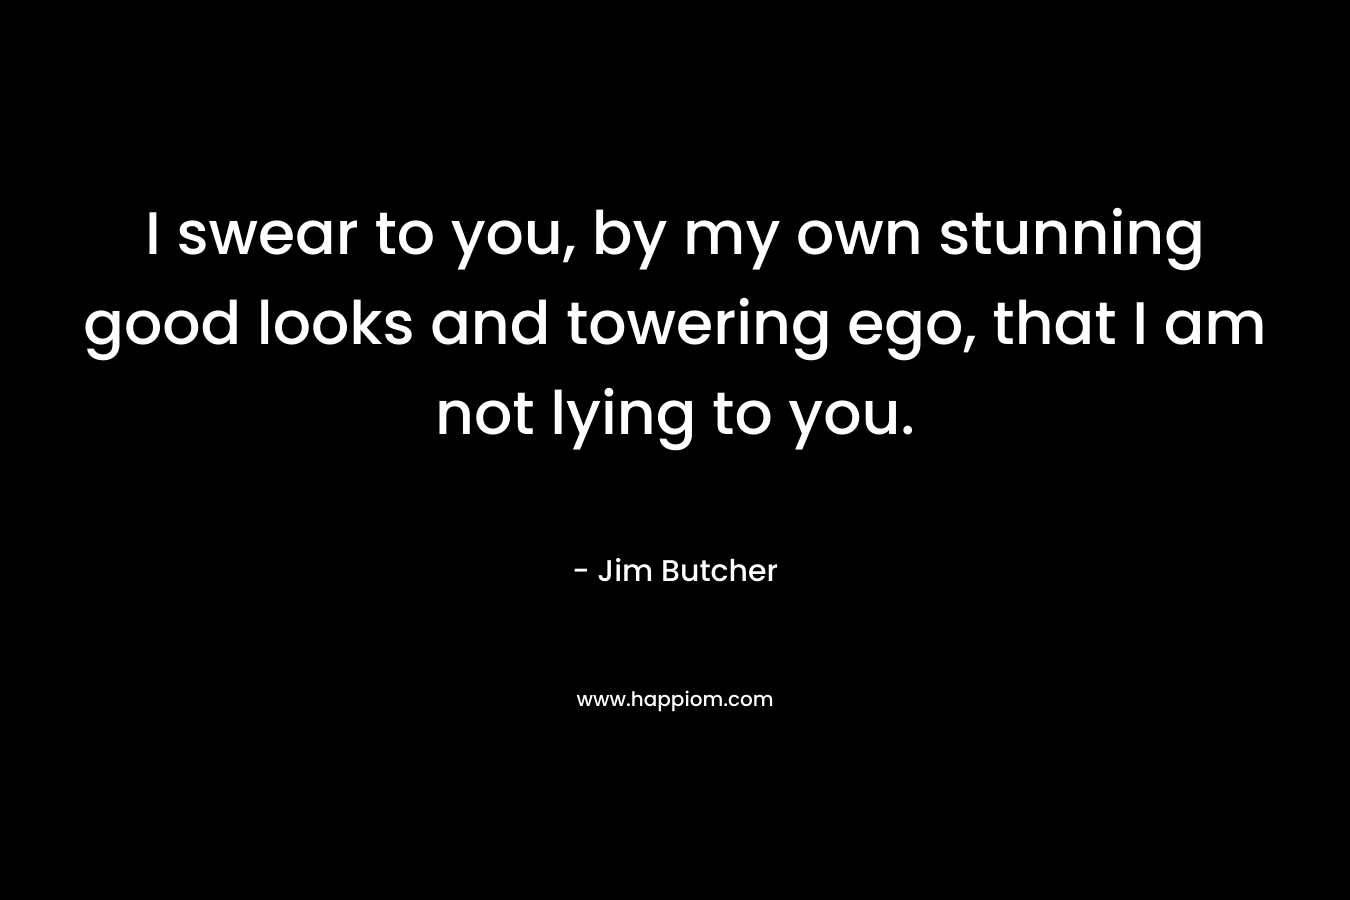 I swear to you, by my own stunning good looks and towering ego, that I am not lying to you. – Jim Butcher